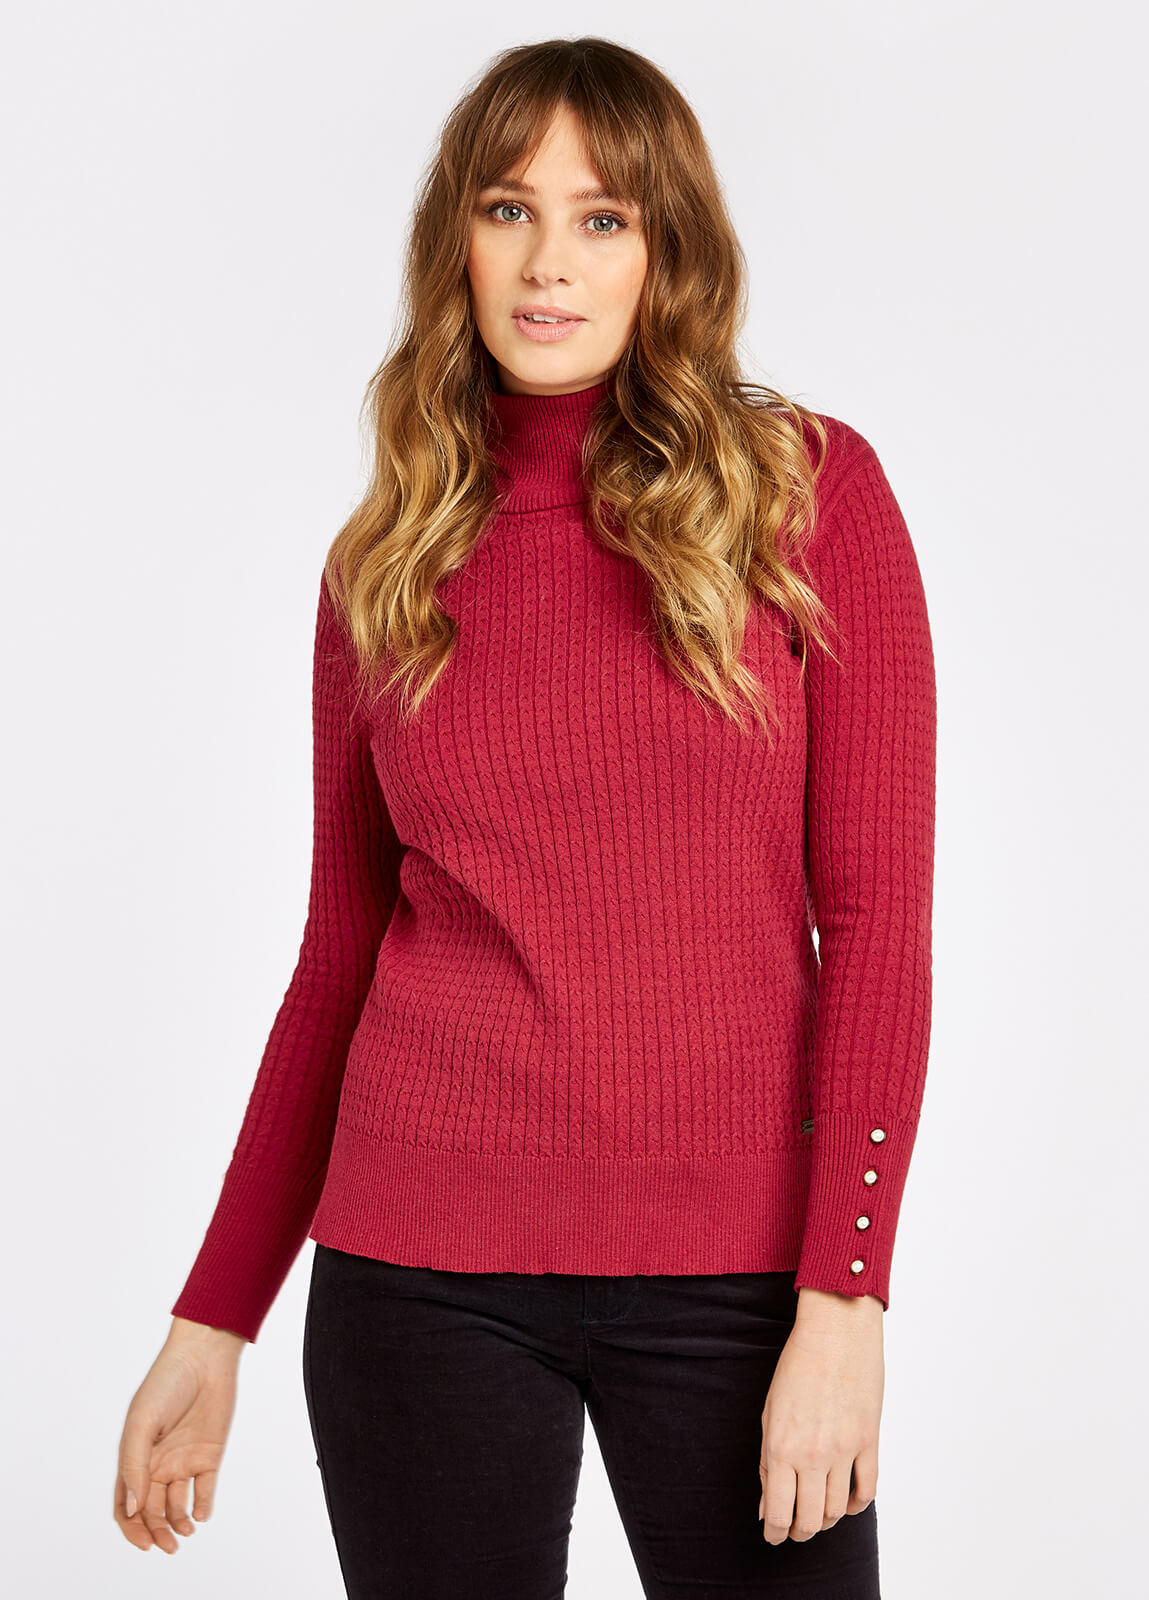 Brennan Knitted Sweater - Ruby